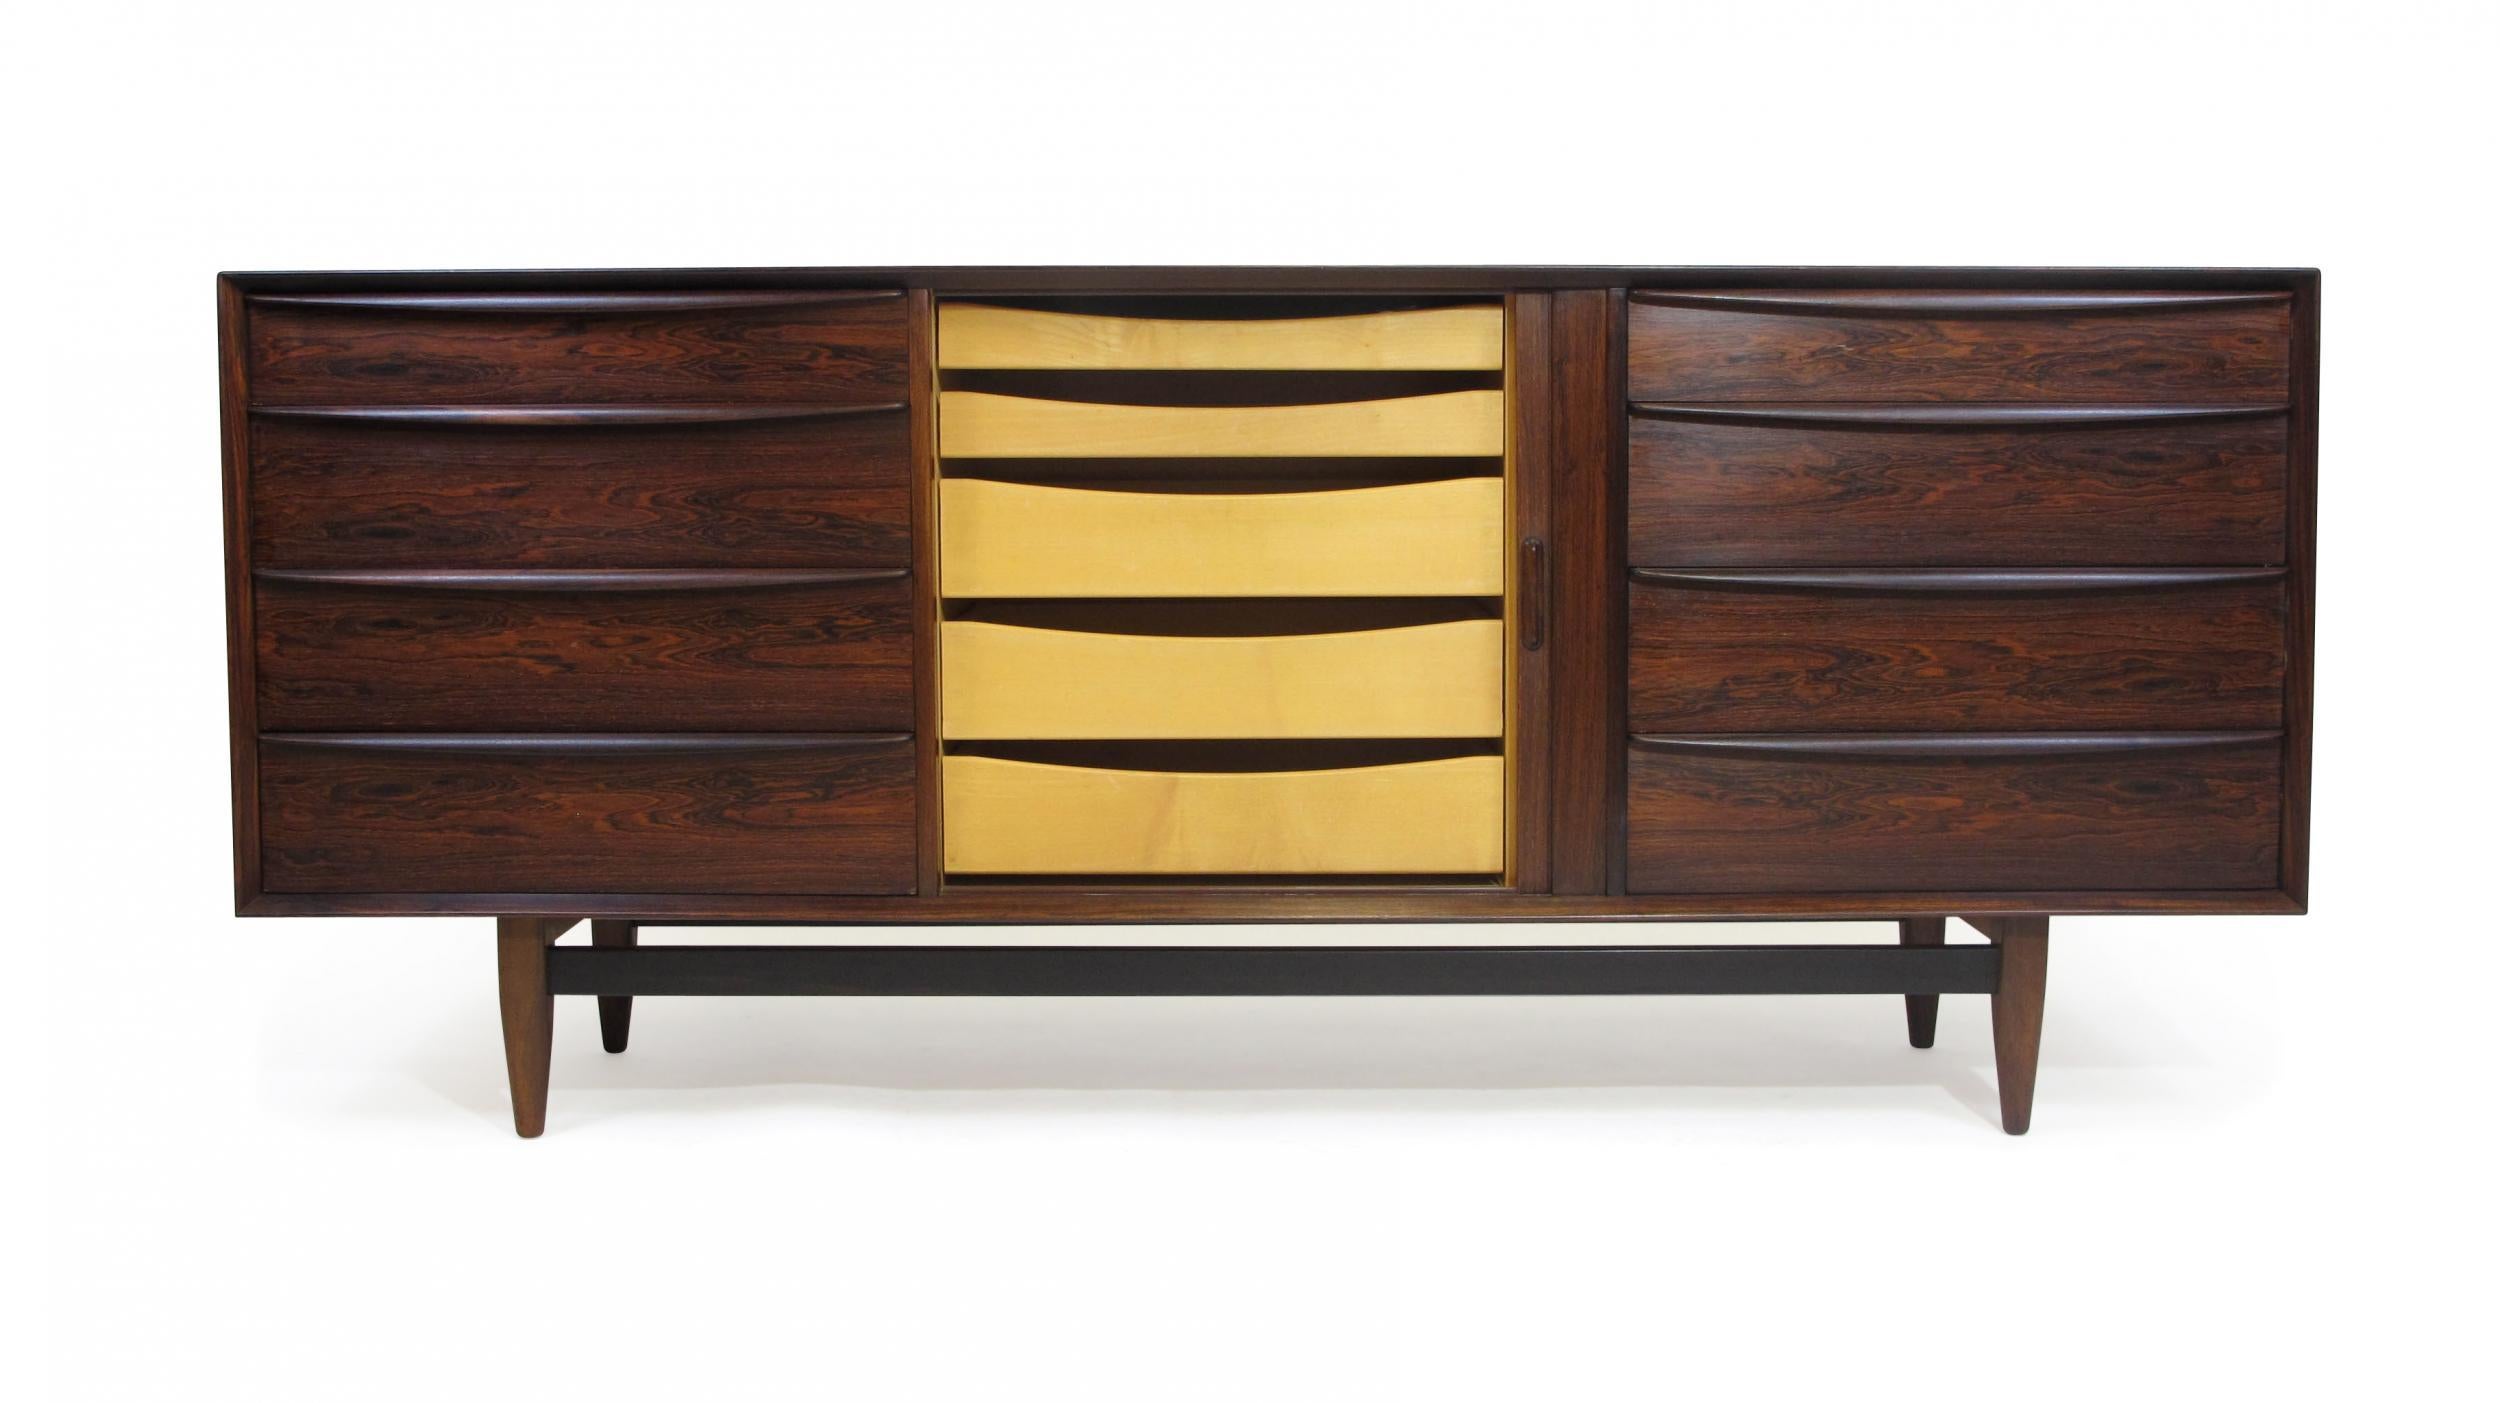 Mid century rosewood dresser credenza designed by Svend Age Madsen for Falster Mobelfabrik, Denmark. Crafted of old-growth dark rosewood with mitered corners, and raised on round tapered legs. The dresser has a total of 13 drawers. The left and